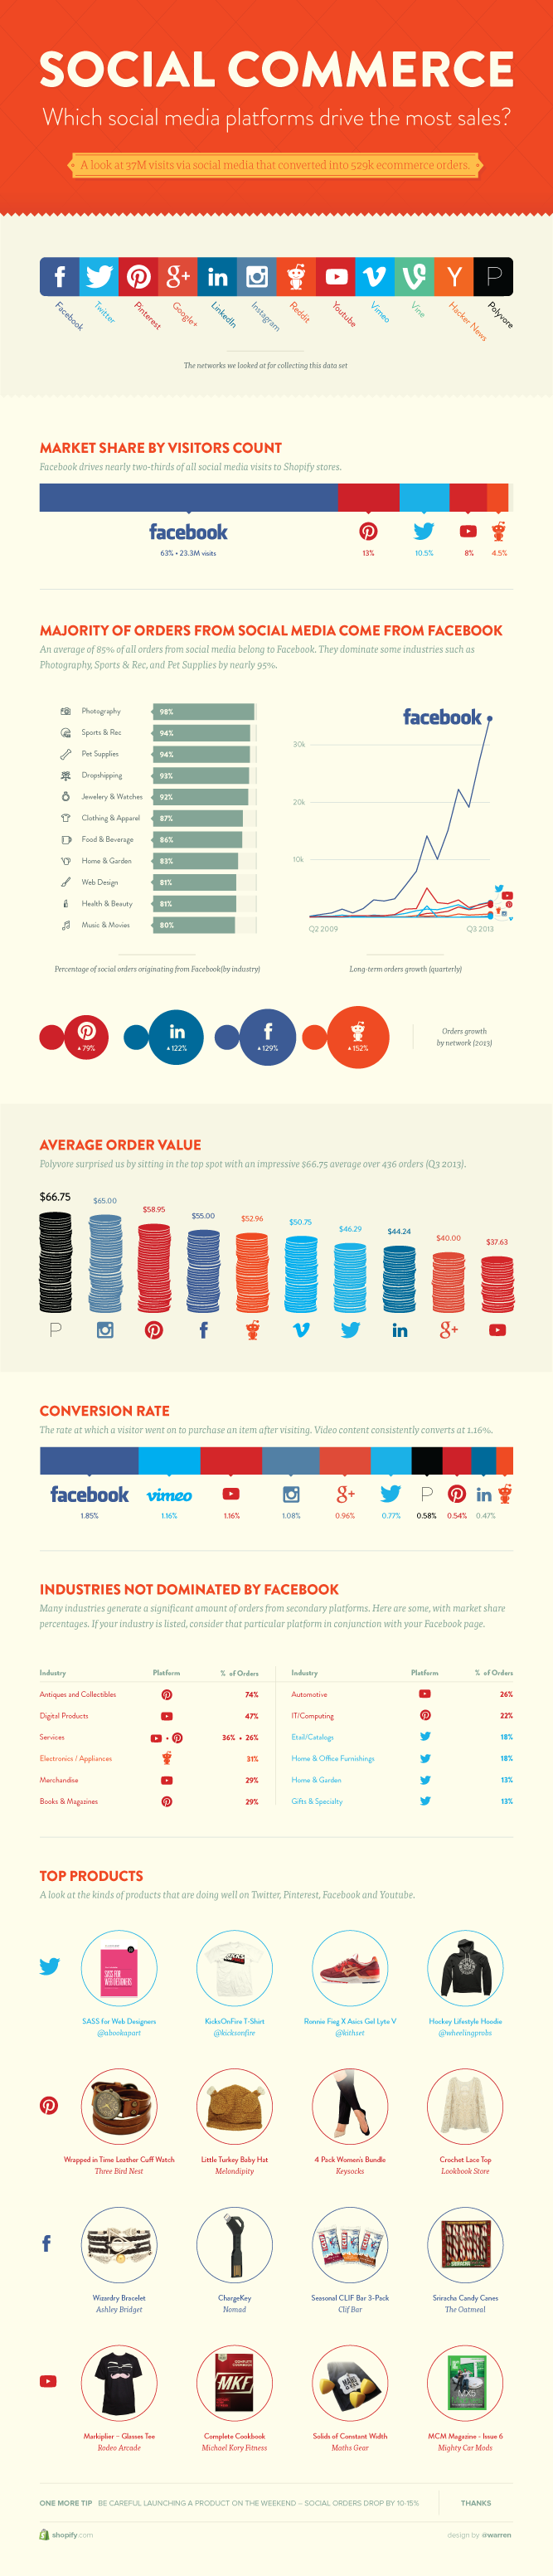 Which Social Media Platforms Drive the Most Sales? [Infographic]